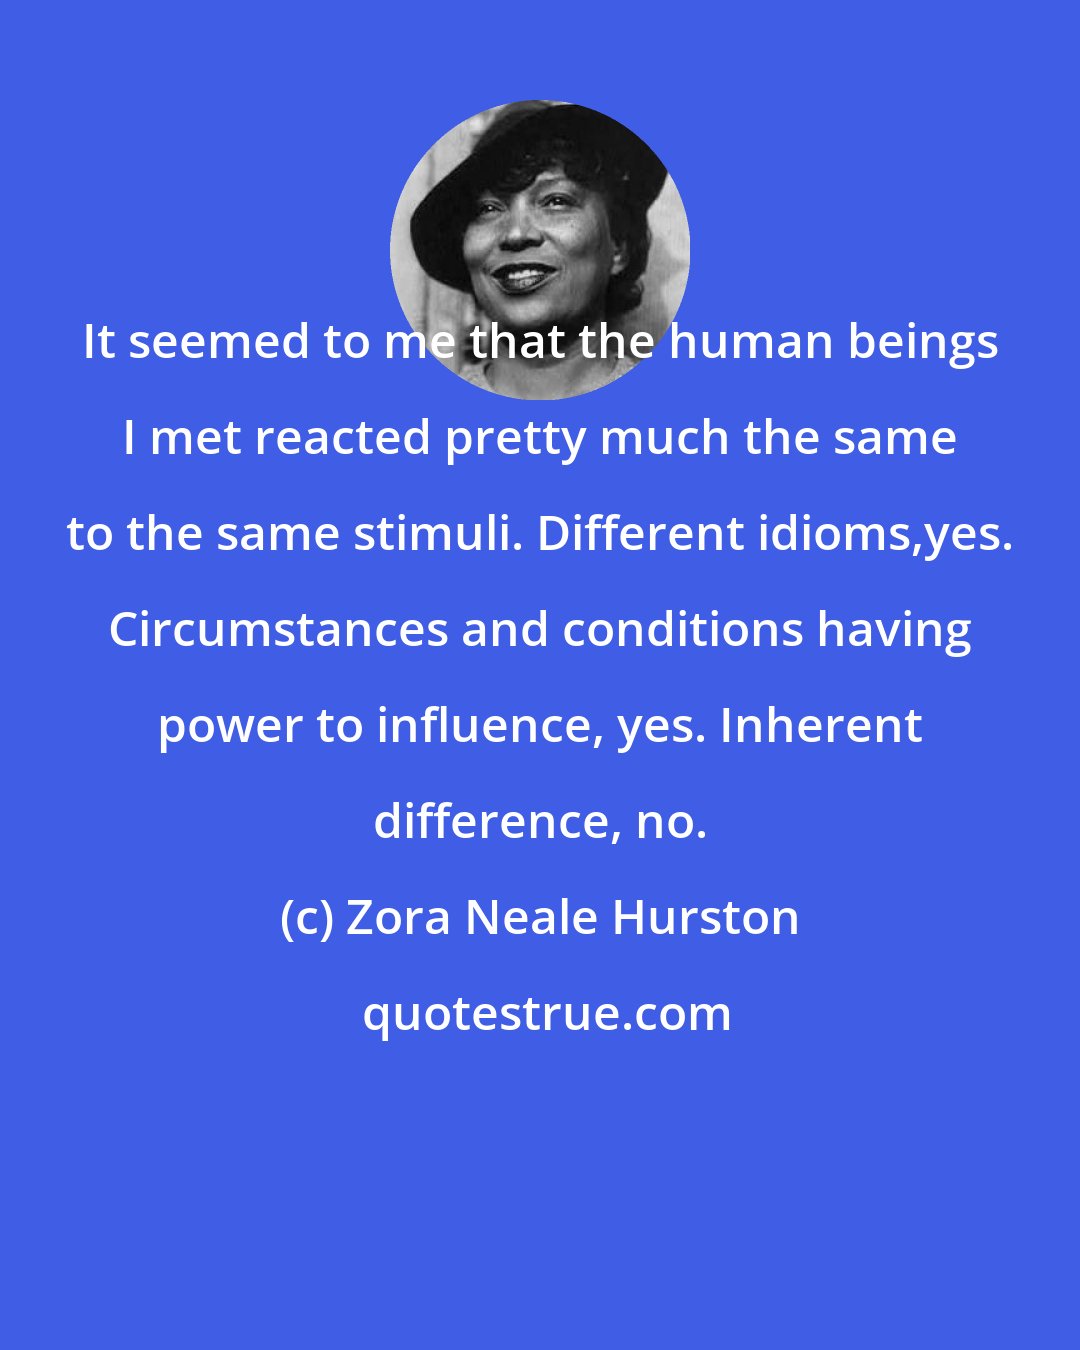 Zora Neale Hurston: It seemed to me that the human beings I met reacted pretty much the same to the same stimuli. Different idioms,yes. Circumstances and conditions having power to influence, yes. Inherent difference, no.